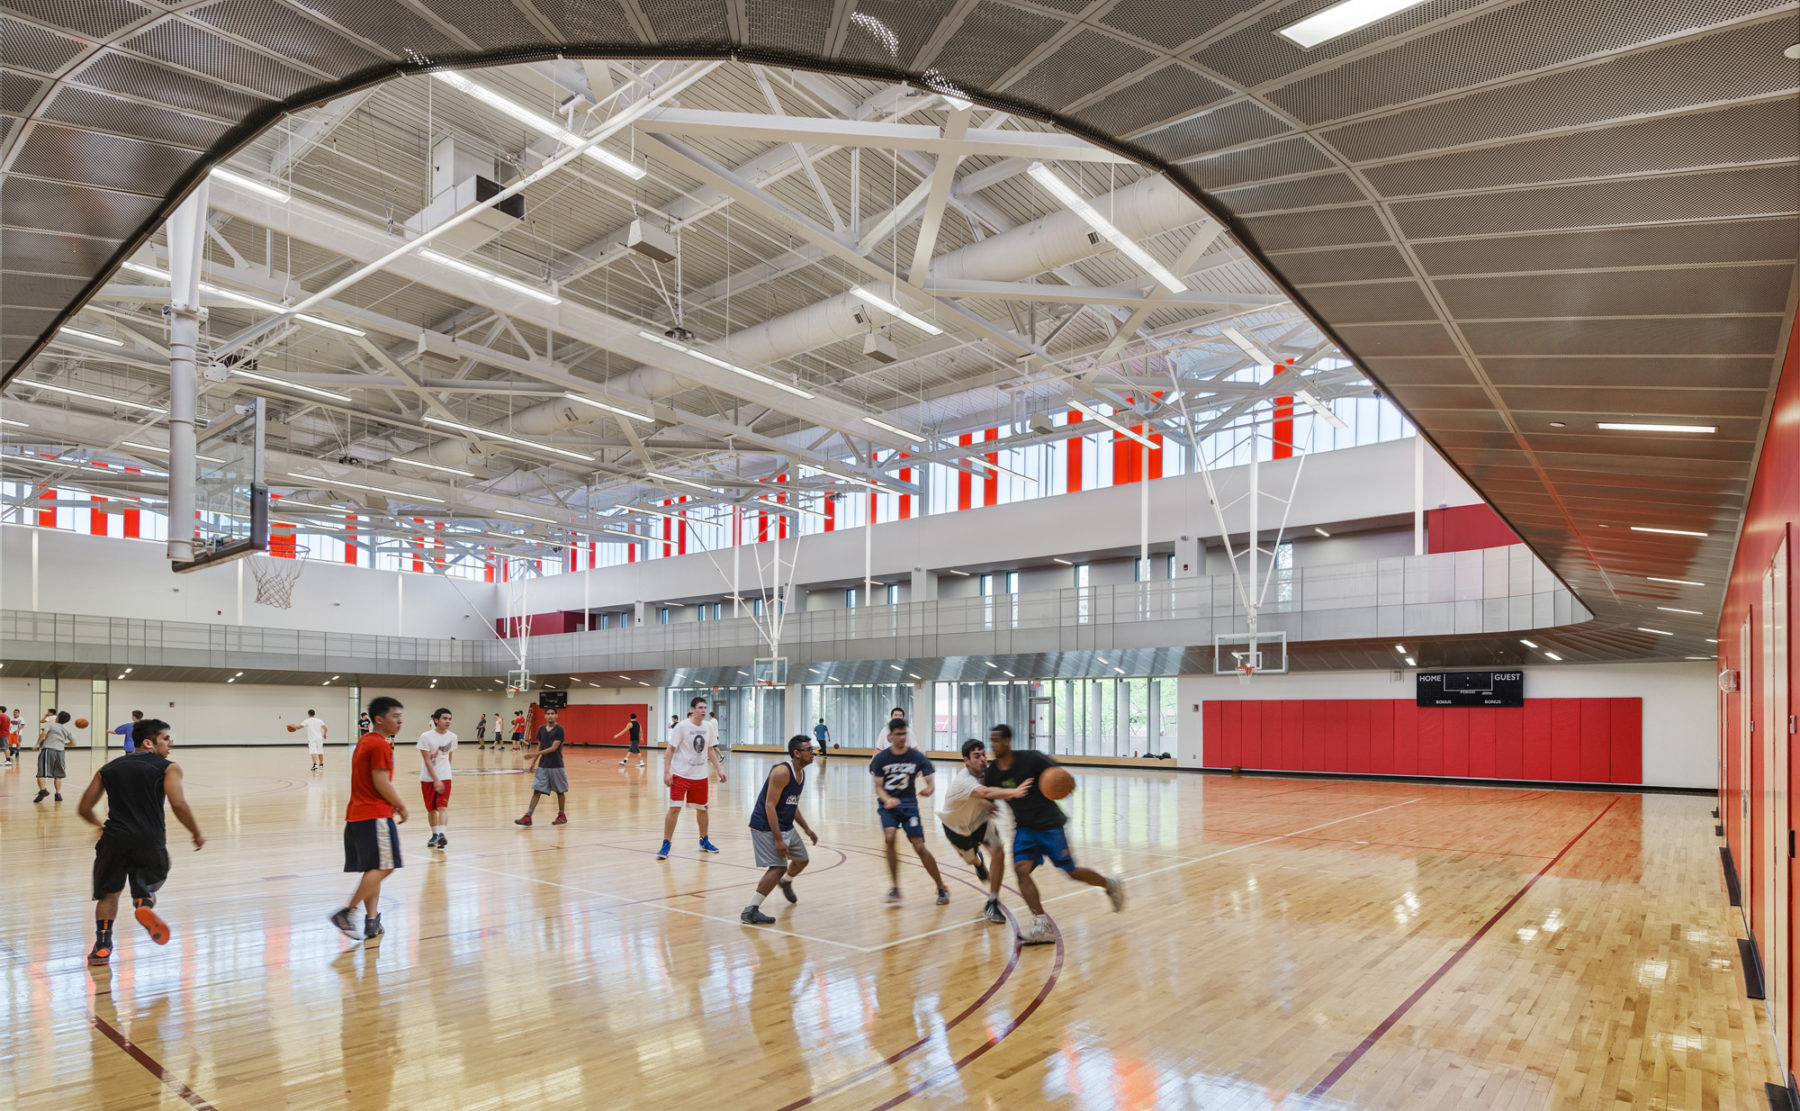 photograph of interior basketball court with people playing basketball